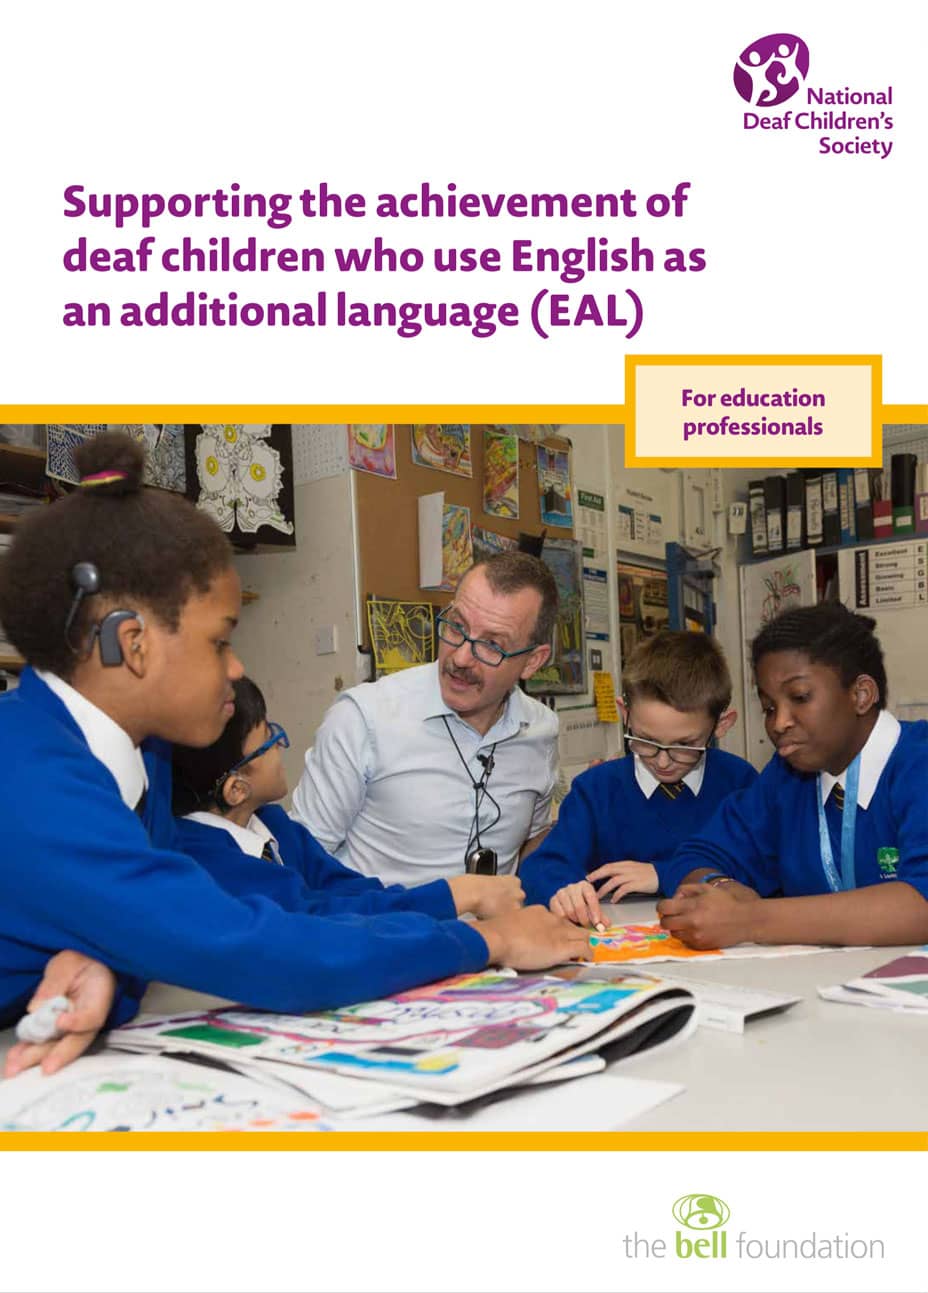 Supporting the achievement of deaf children who use English as an additional language (EAL)